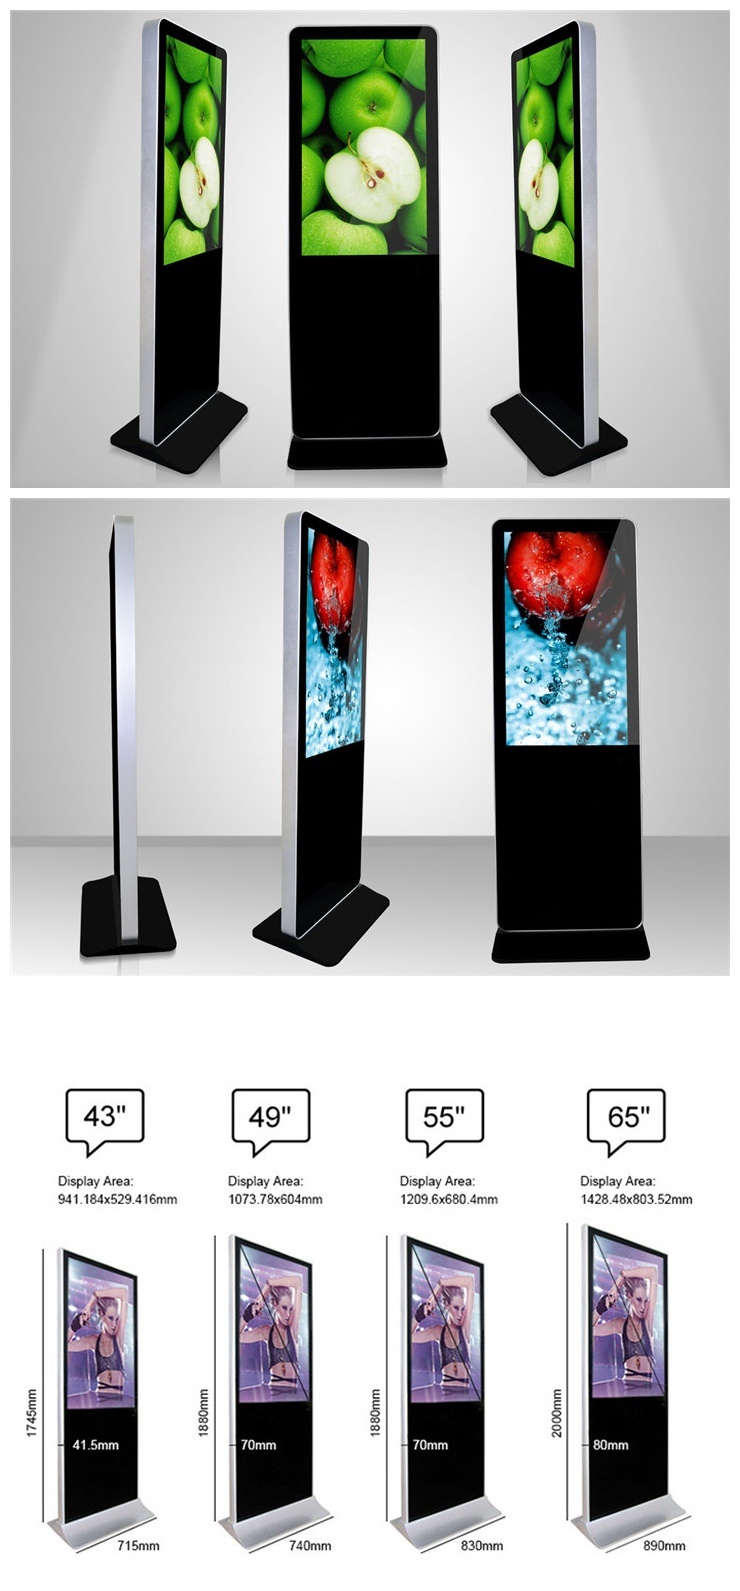 All in One PC Display Advertising Kiosk 43 Inch Super Thin Floor Stand Digital Signage Player Advertising LED Display Price Ad Player